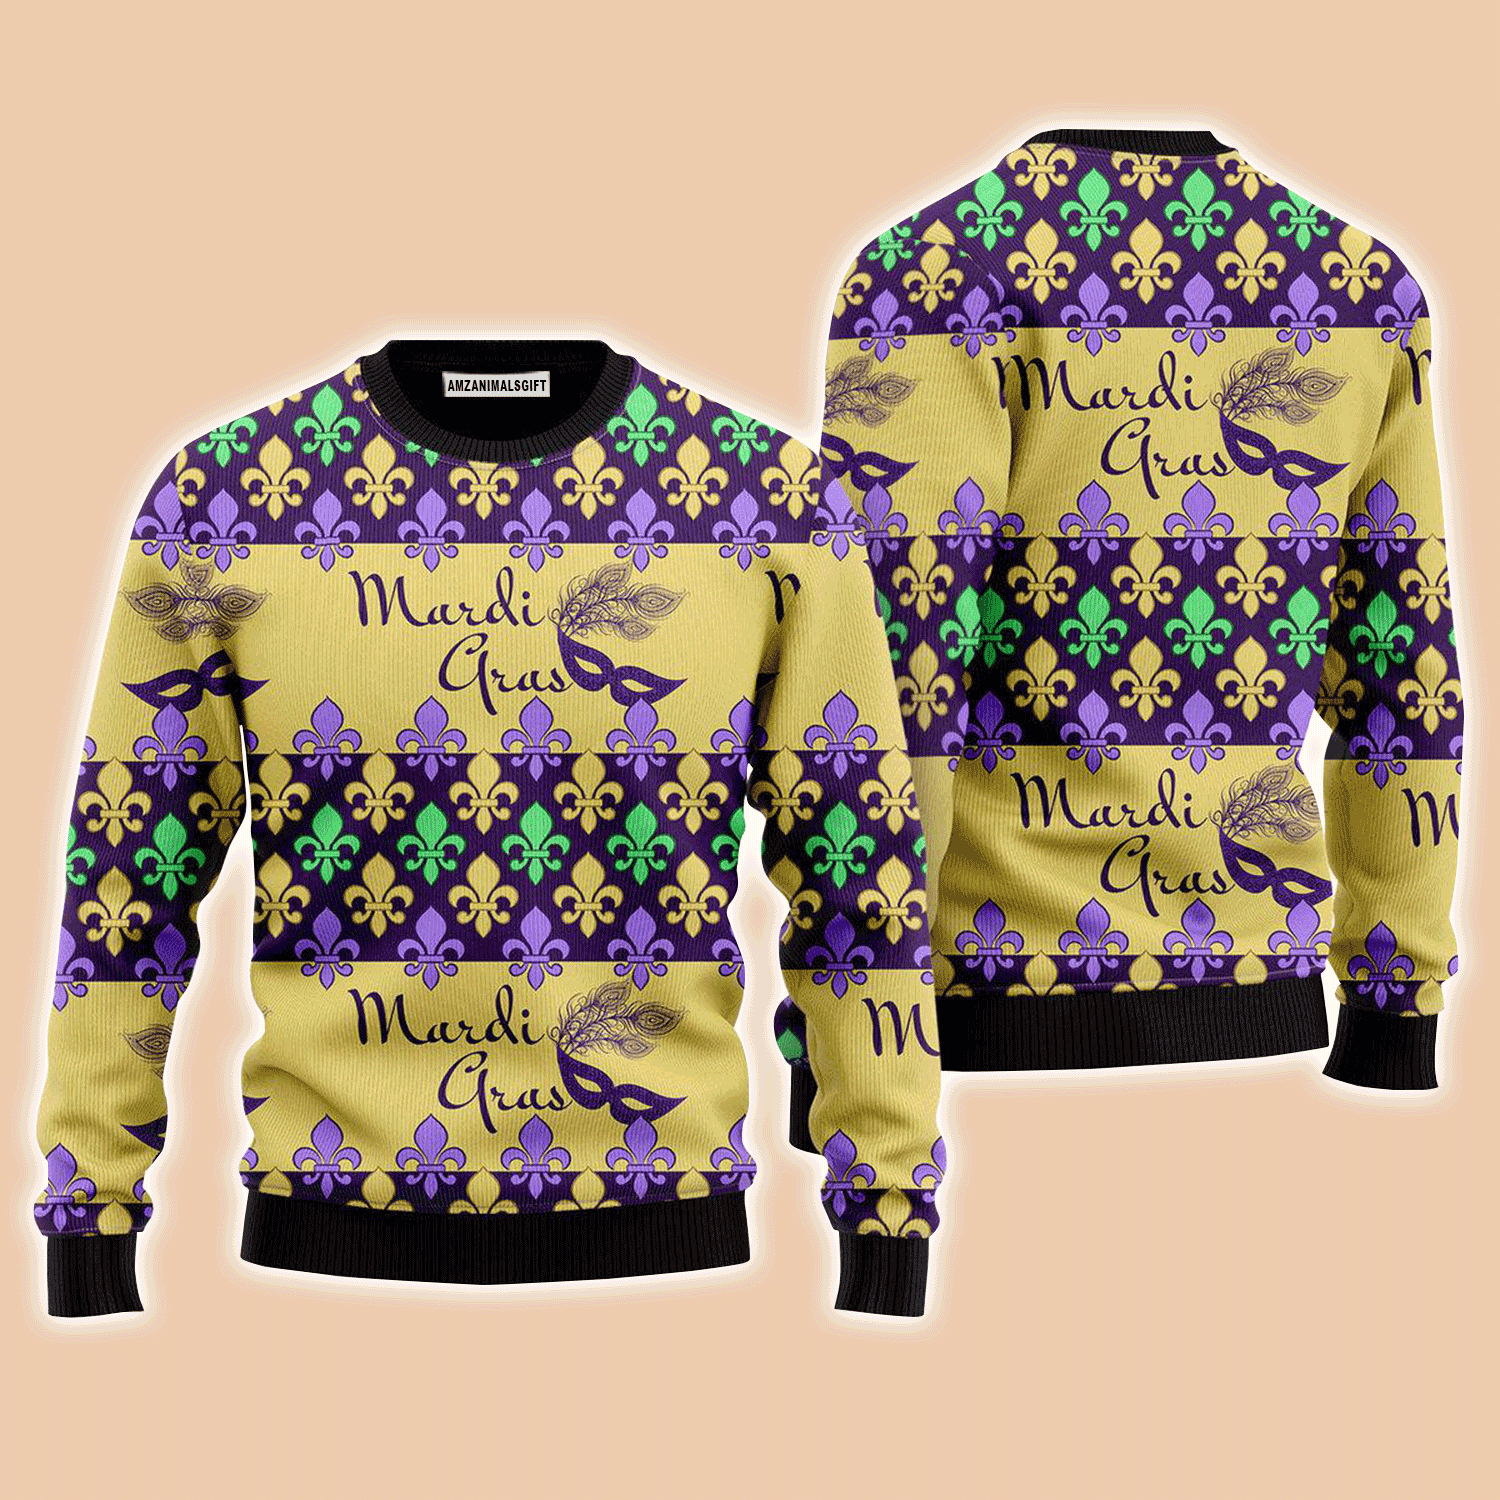 Mardi Gras Fleur De Lis Sweater, Ugly Sweater For Men & Women, Perfect Outfit For Christmas New Year Autumn Winter